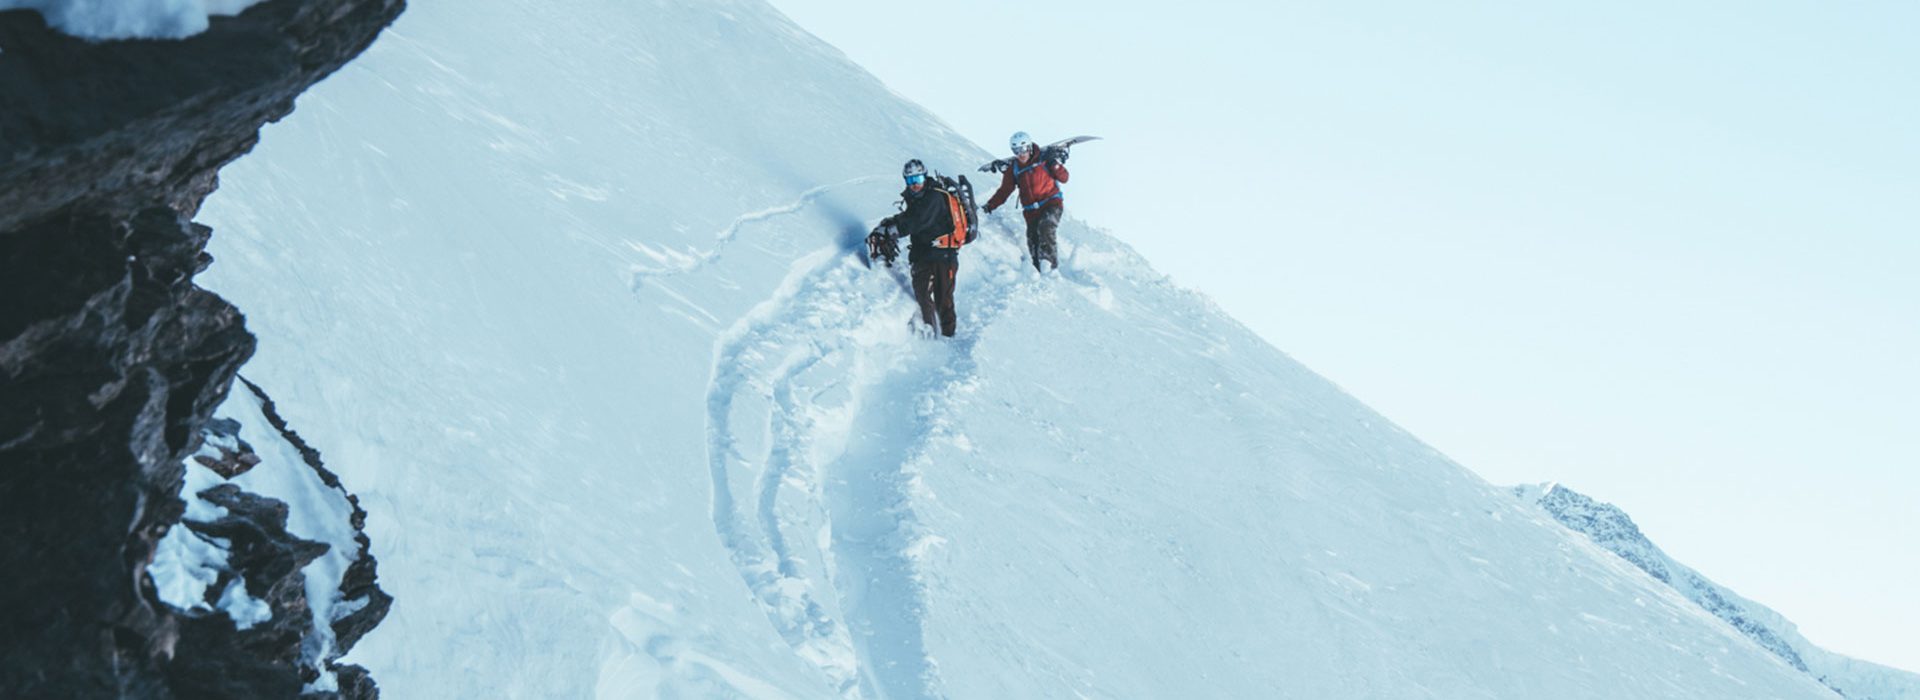 The best freeriding lines are not easy to reach but our guides will show us the way.